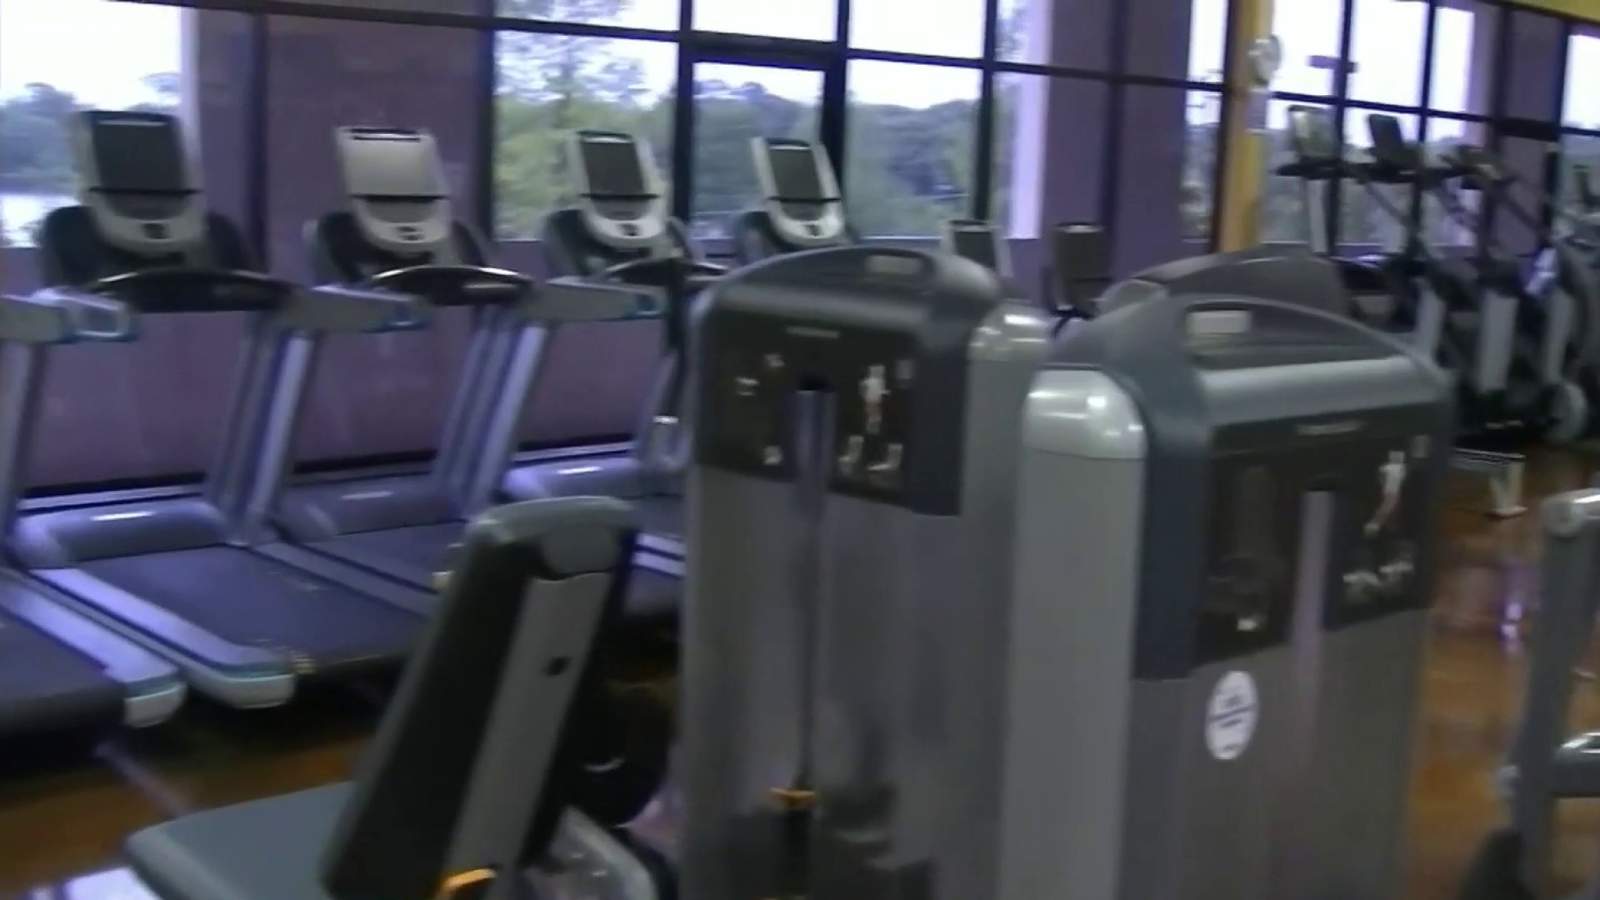 Gyms remain closed during Florida’s first phase of reopening